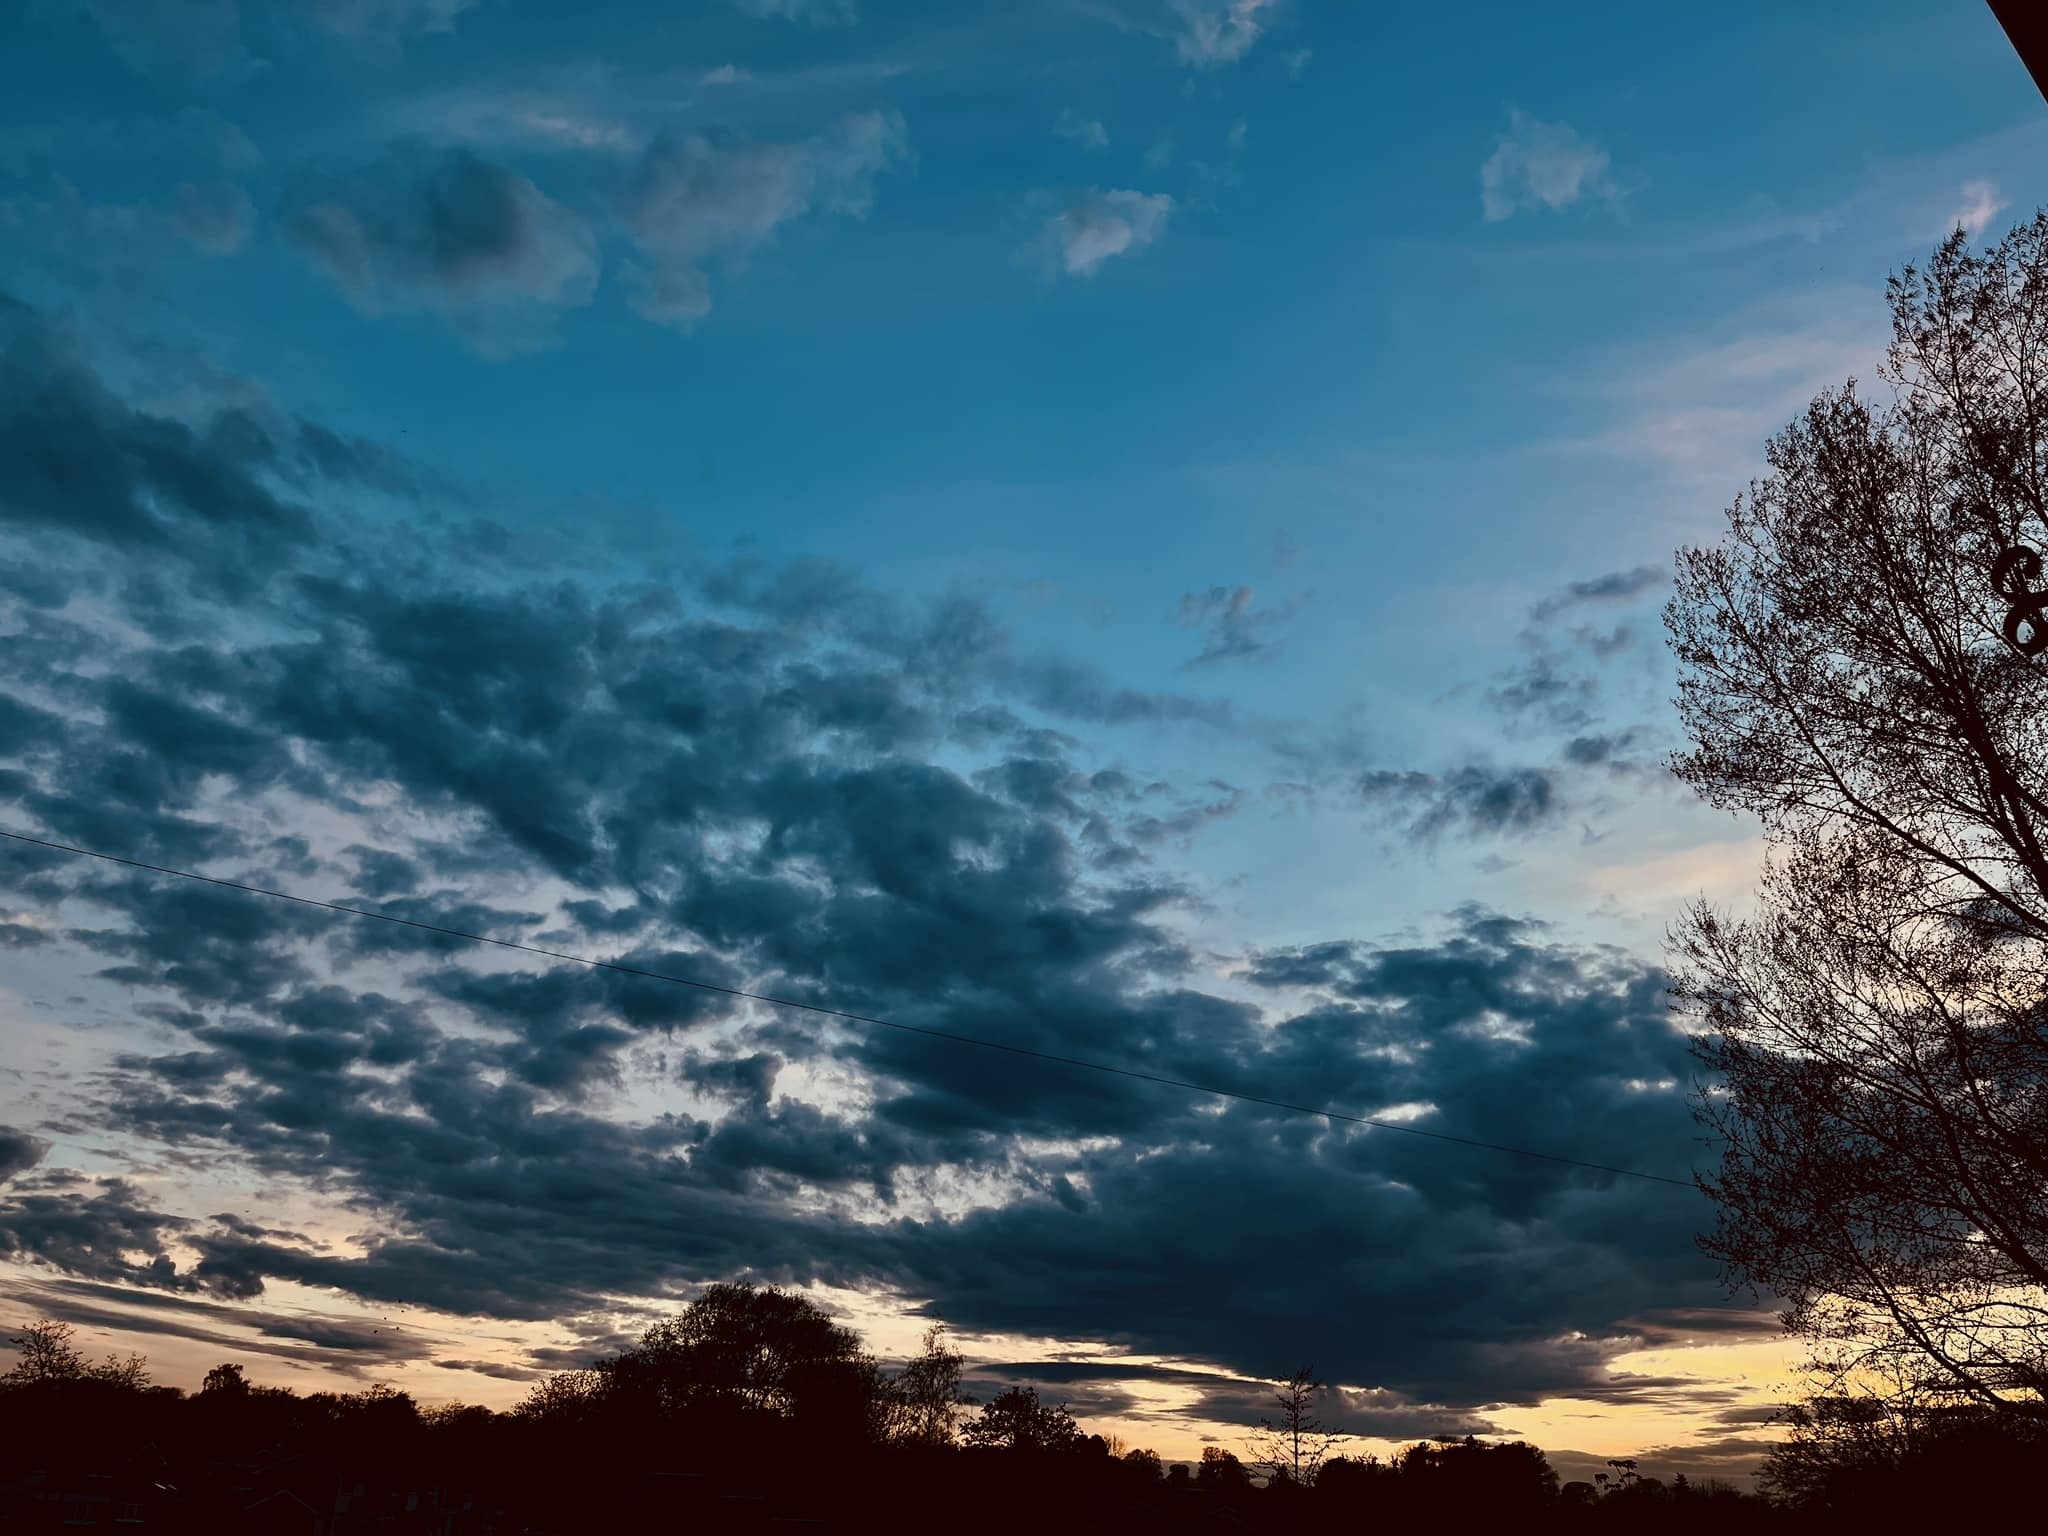 Storm clouds at sunset over Knutsford by Carly Jo Curbishley